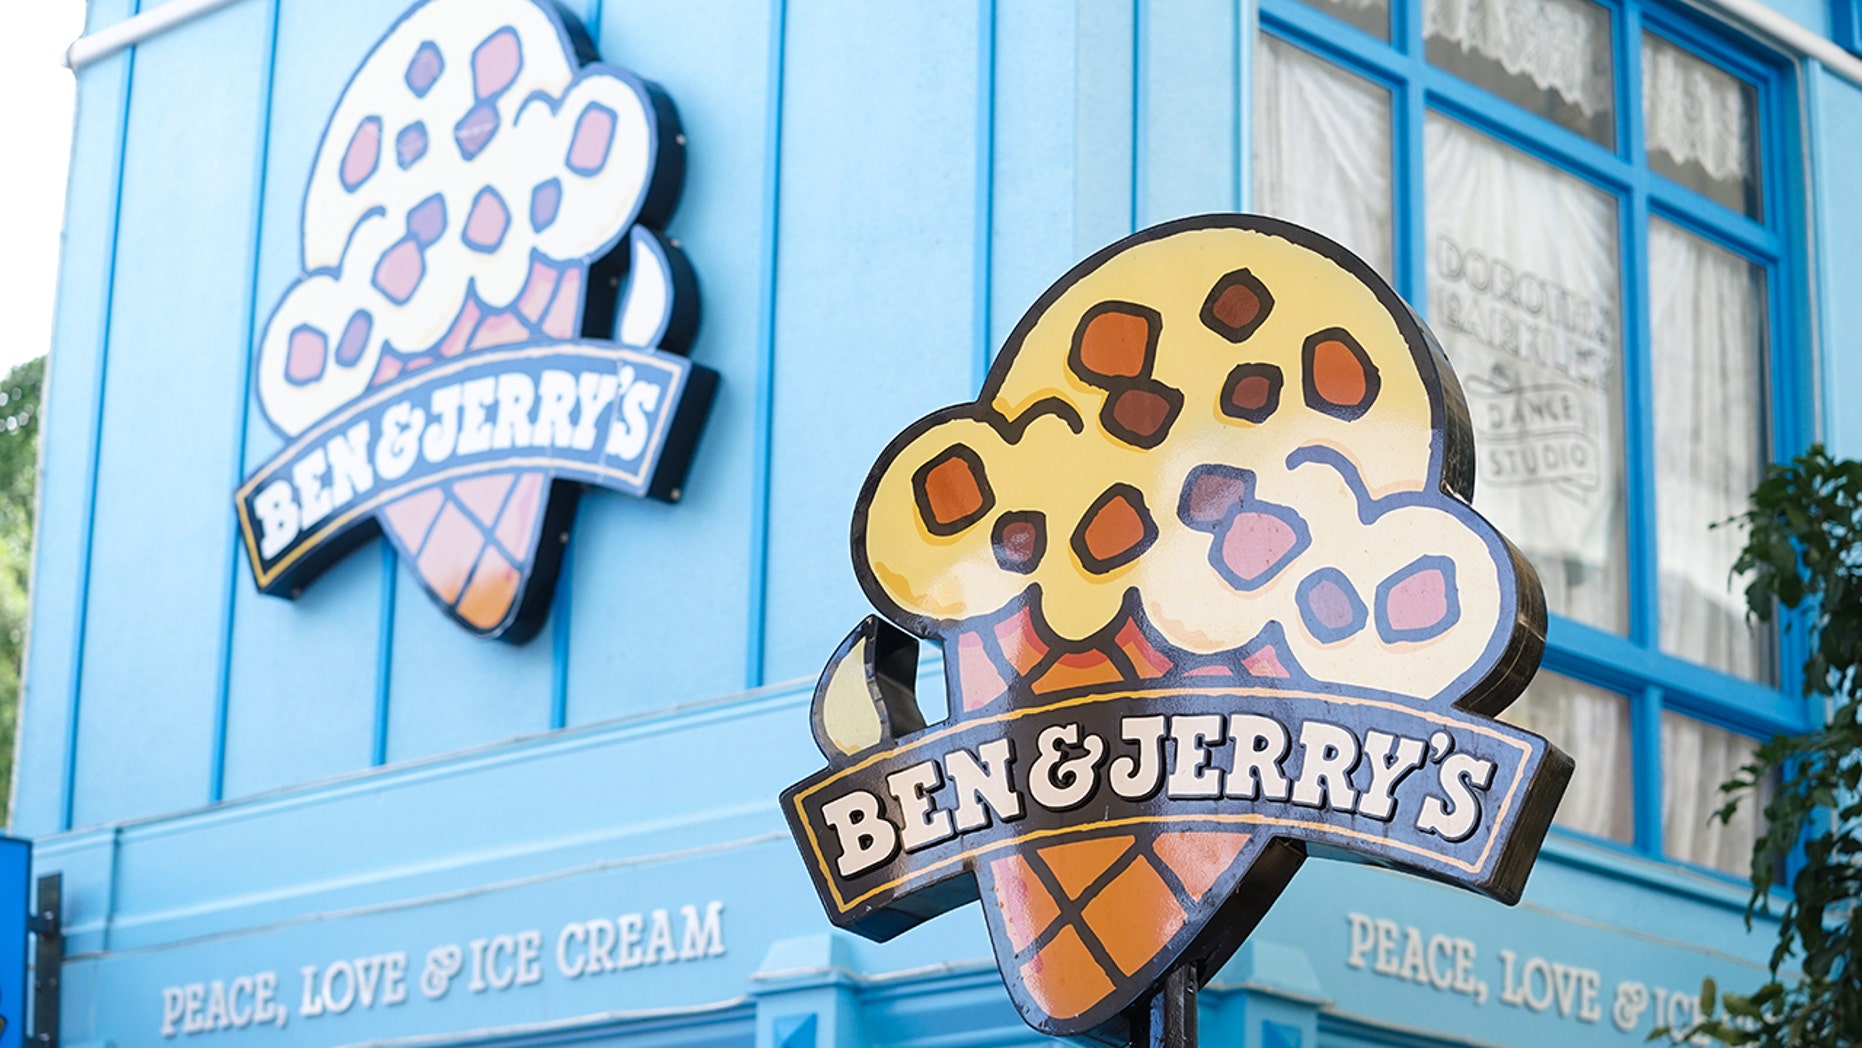 Ben & amp; Jerry's ice cream shop at the Gold Coast of Movie World. Ben & amp; Jerry's created a petition for the annulment of previous convictions for marijuana